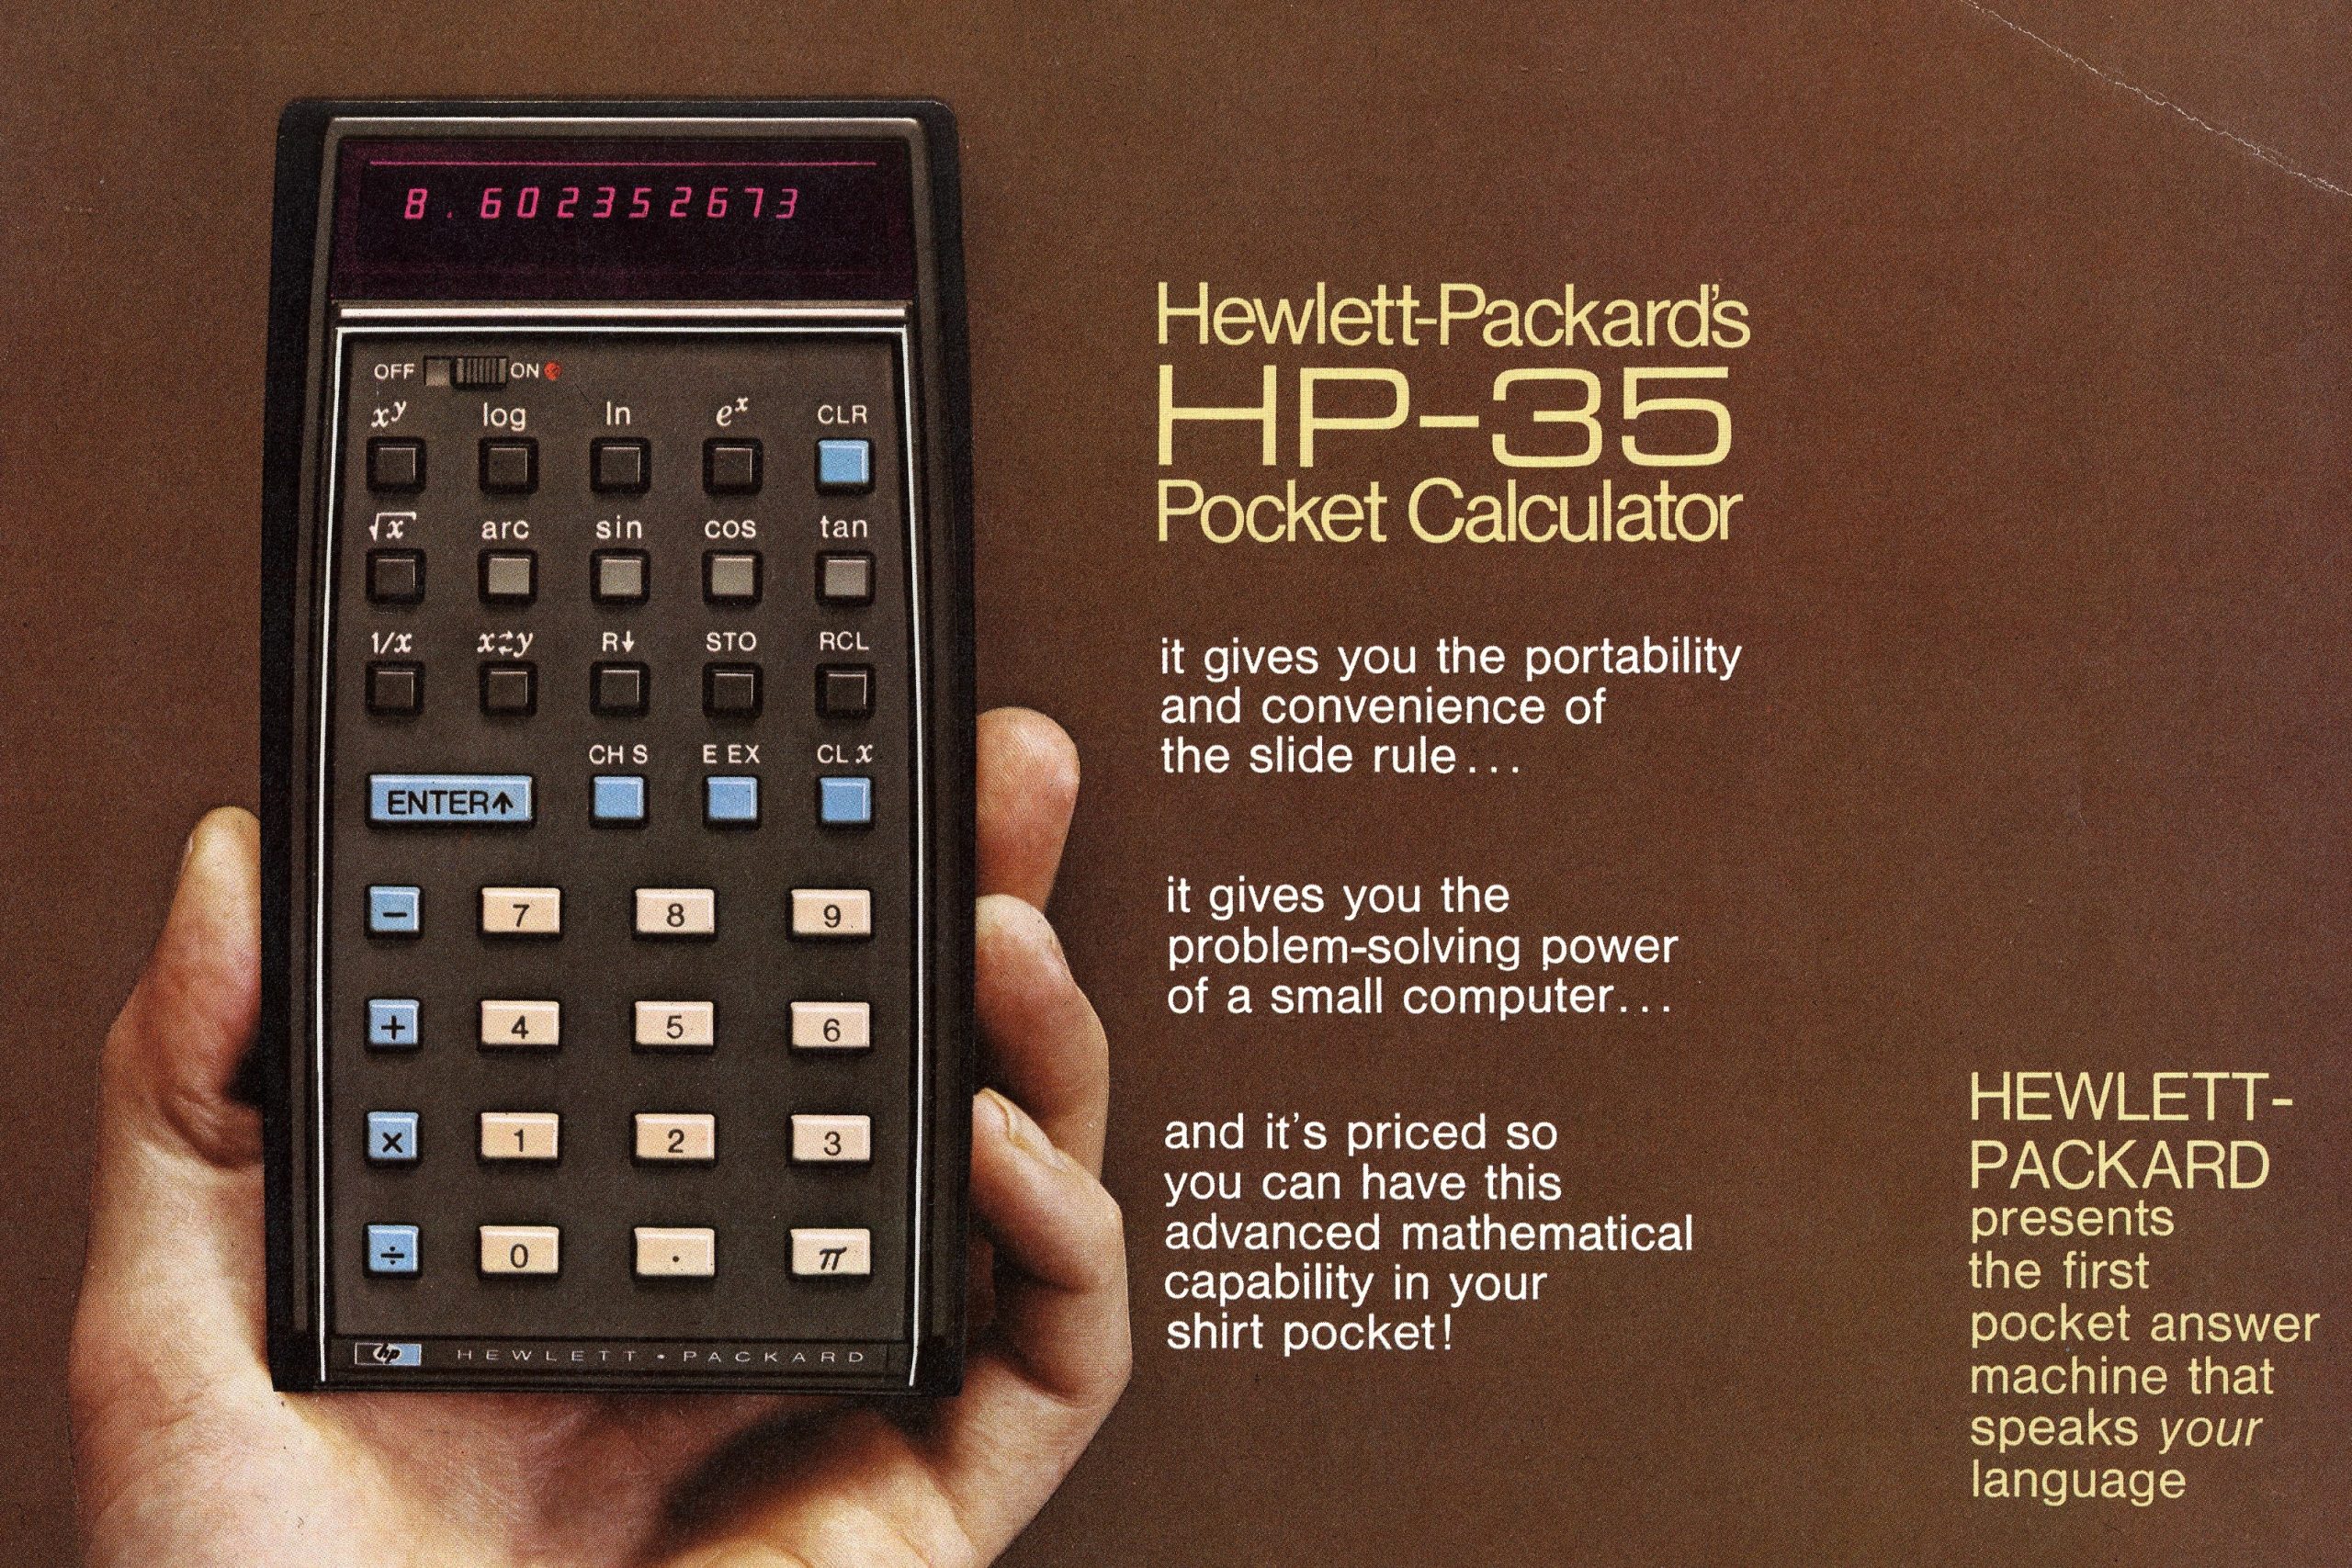 An ad for the HP 35 featuring the device held in one hand with text emphasizing its portability, power and reasonable price.